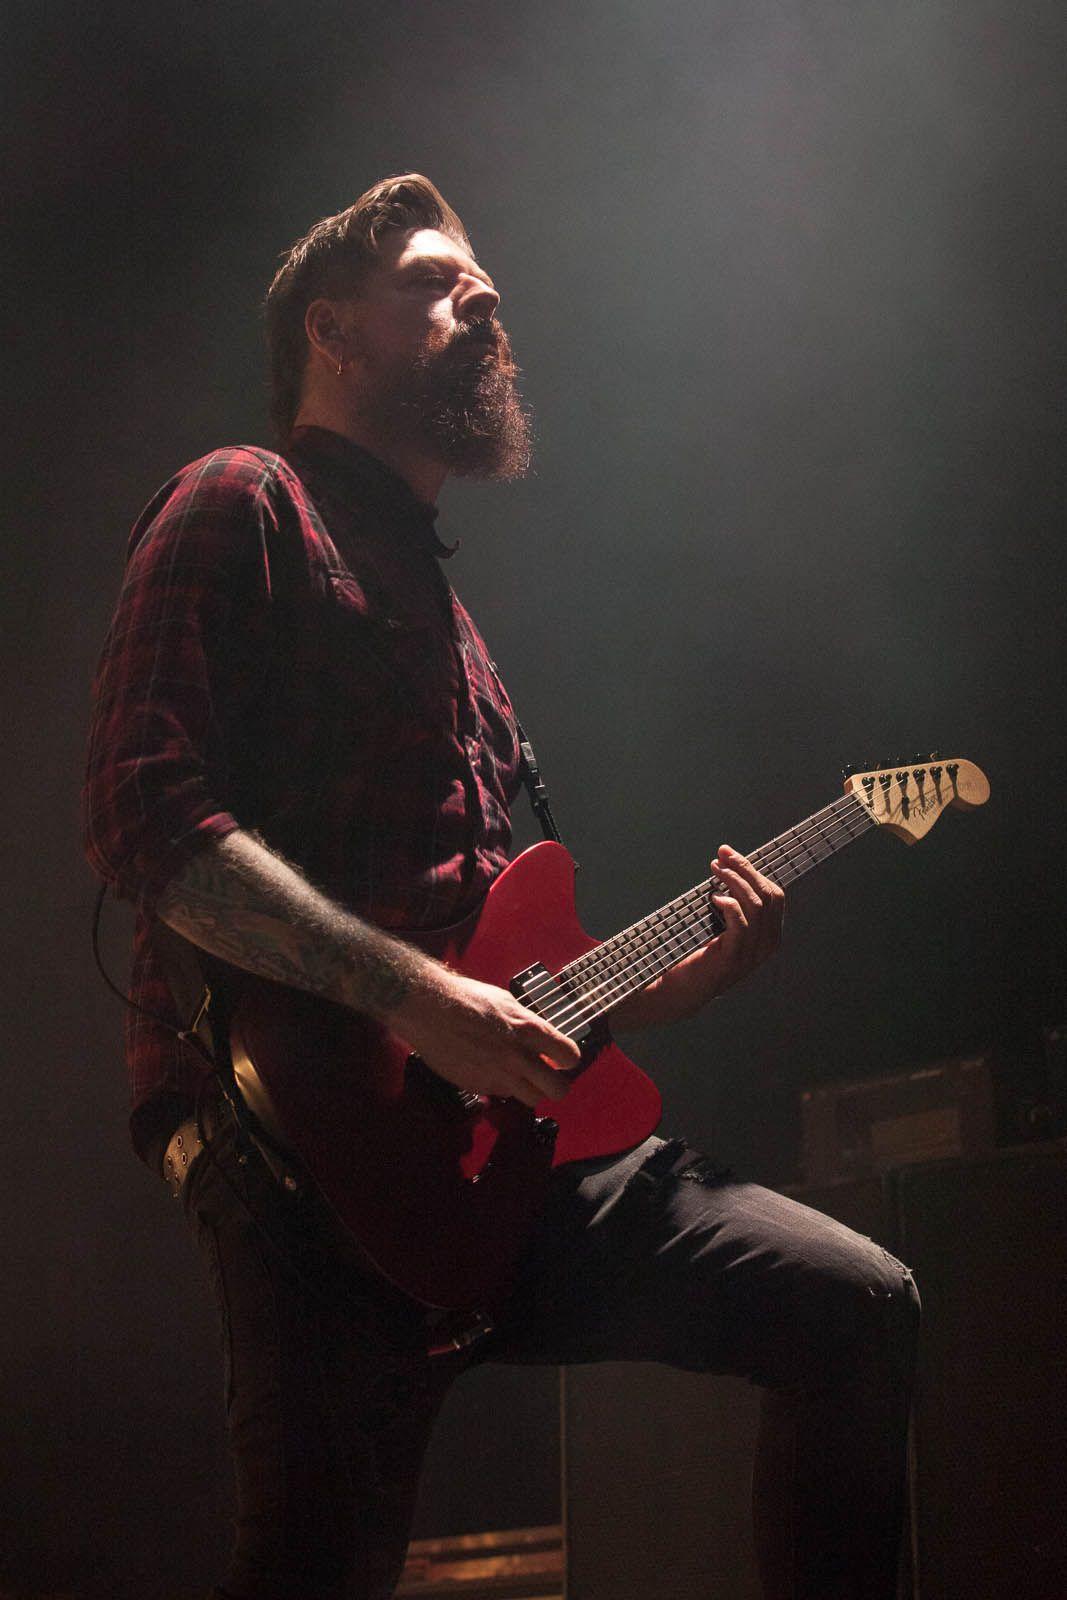 Jim Root, the most legendary beard in Metal :D. Guitars and such